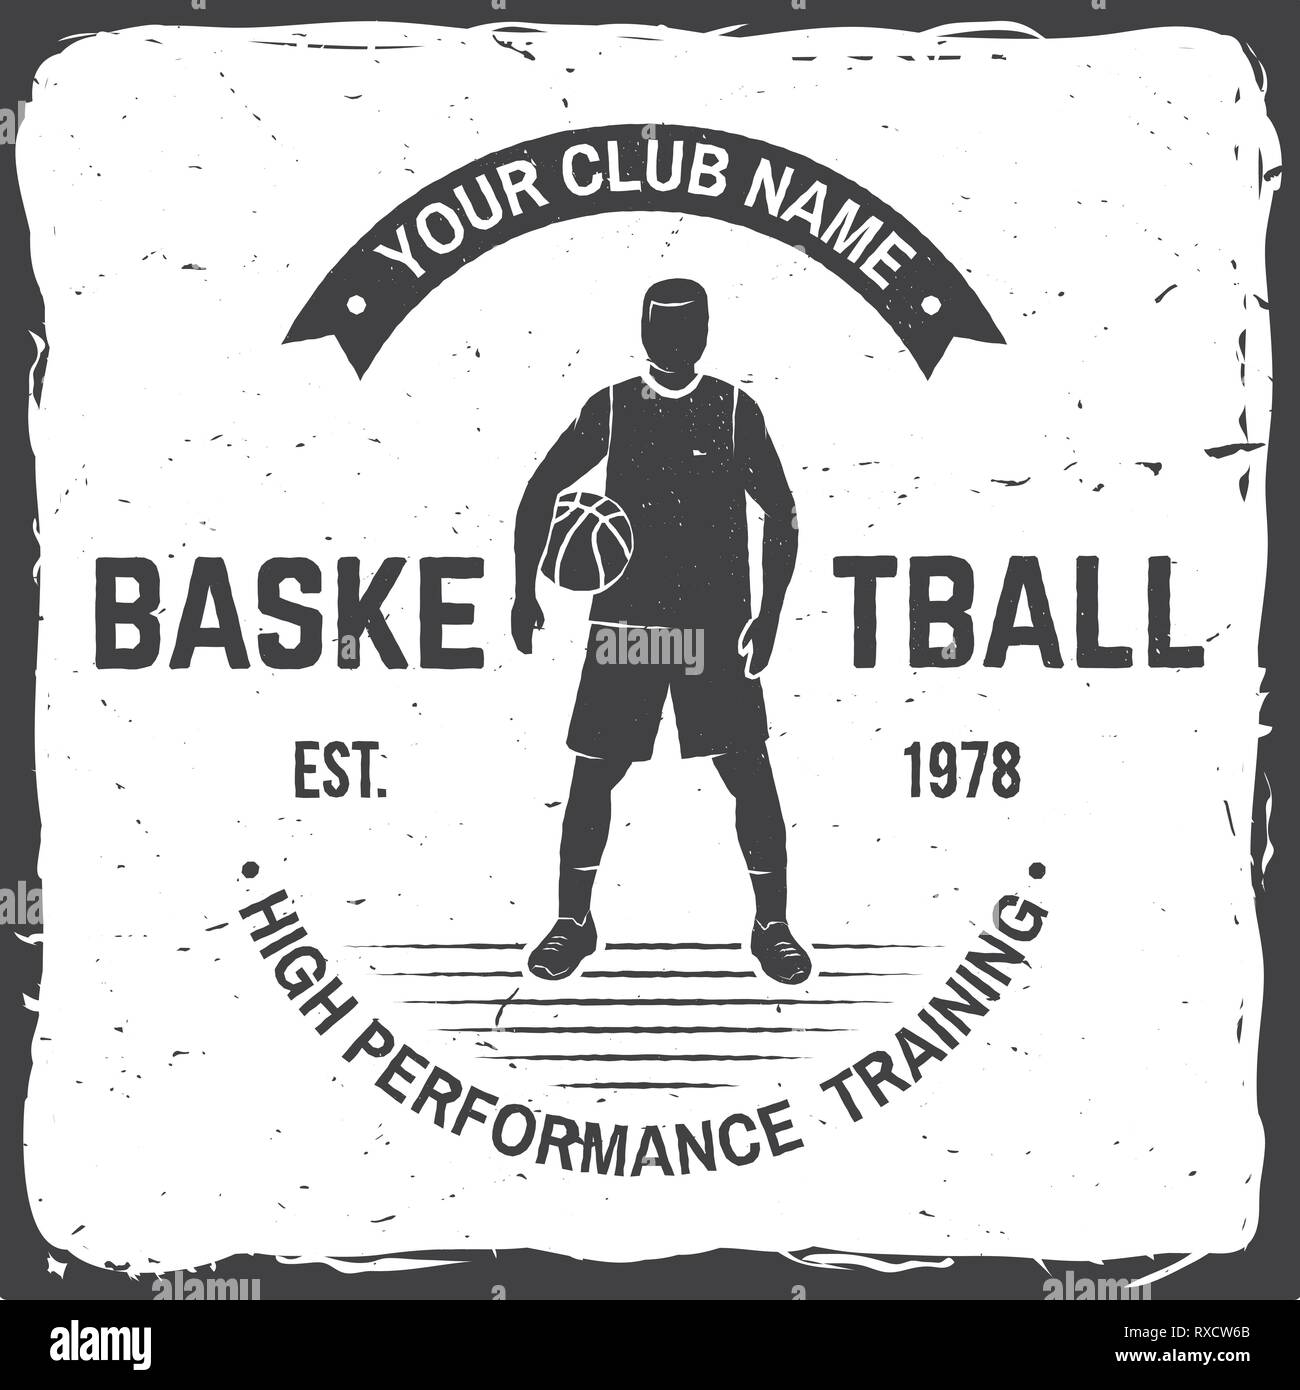 Basketball club badge. Vector illustration. Concept for shirt, print, stamp or tee. Vintage typography design with basketball player and basketball ball silhouette Stock Vector